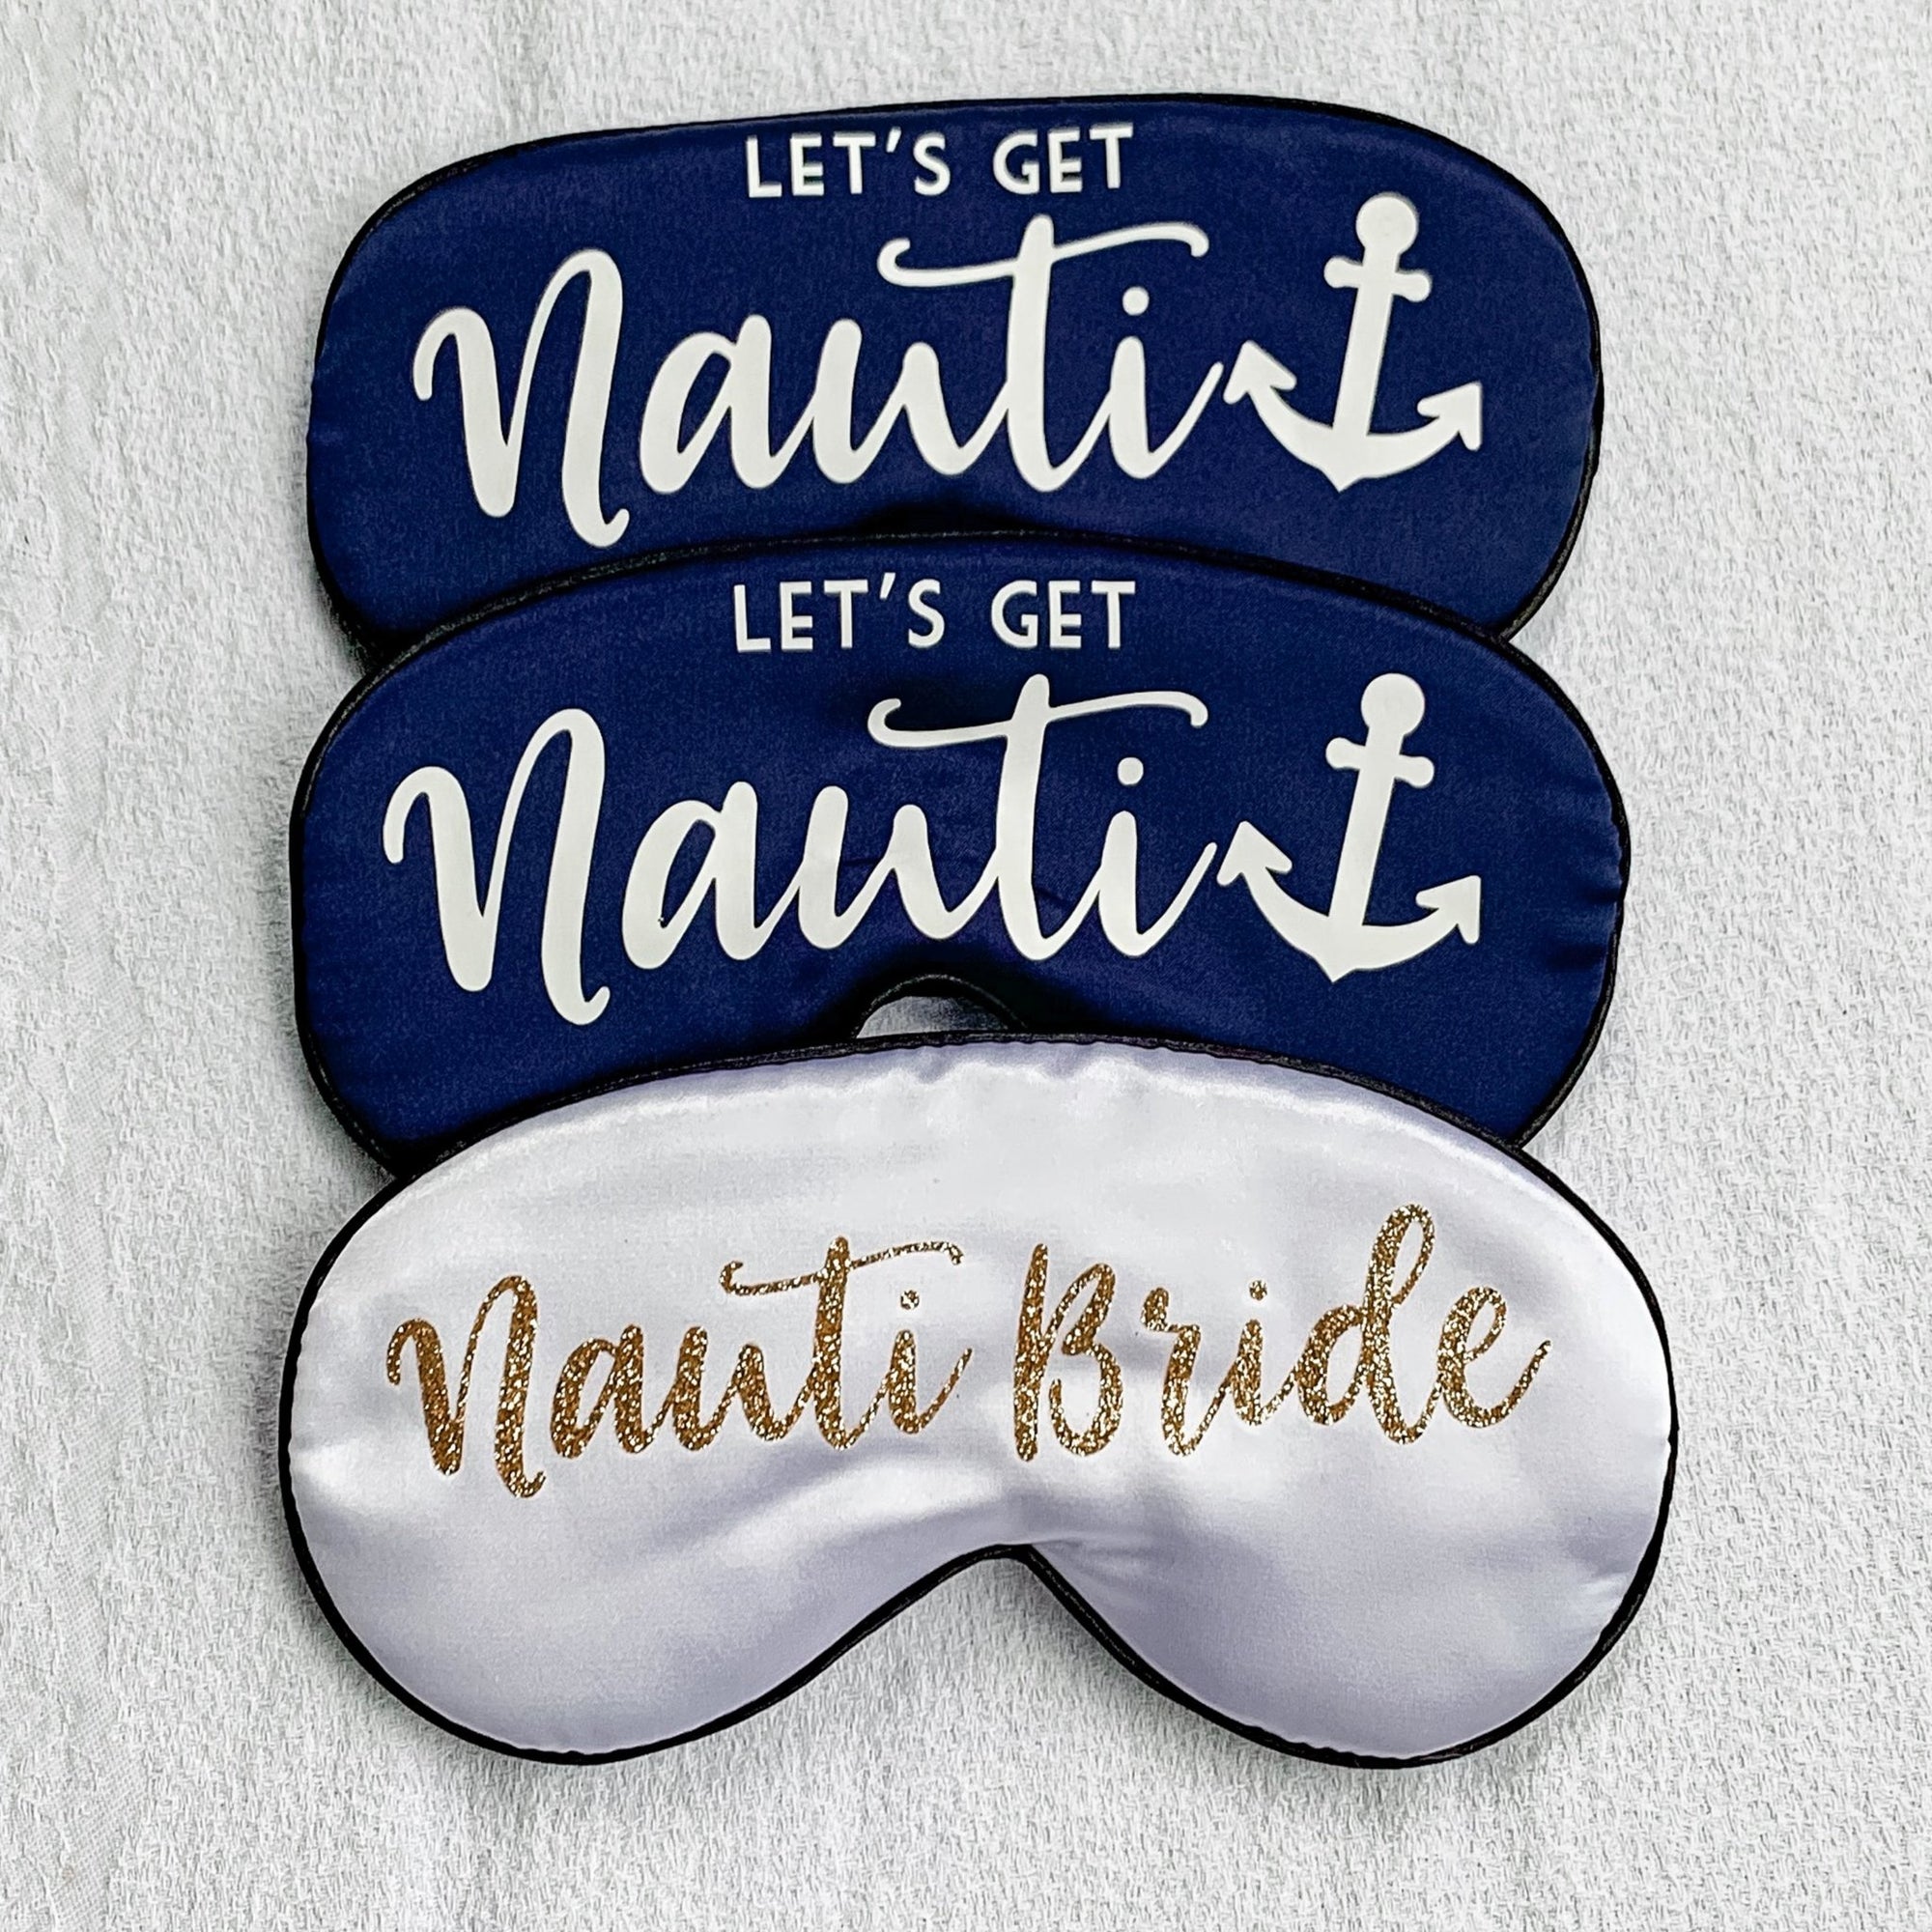 A white sleep mask that reads "Nauti Bride" in gold is paired with two navy sleep masks which read "Let's Get Nauti" in white writting.